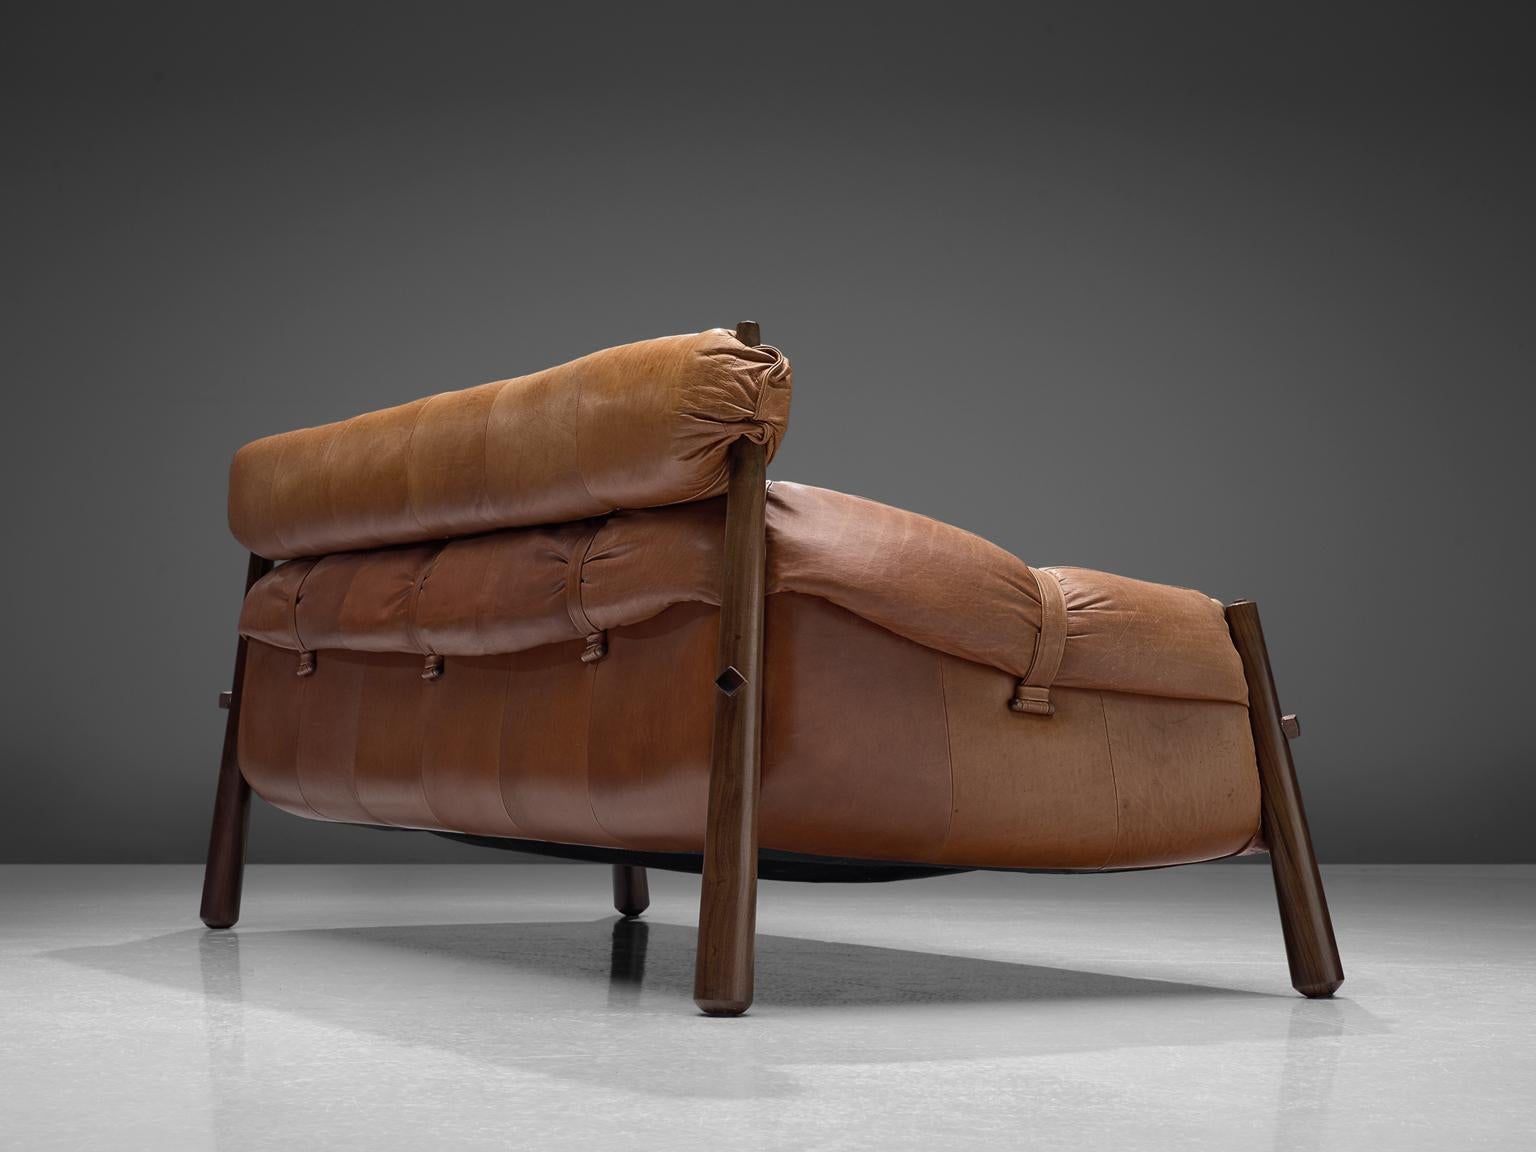 percival lafer couch